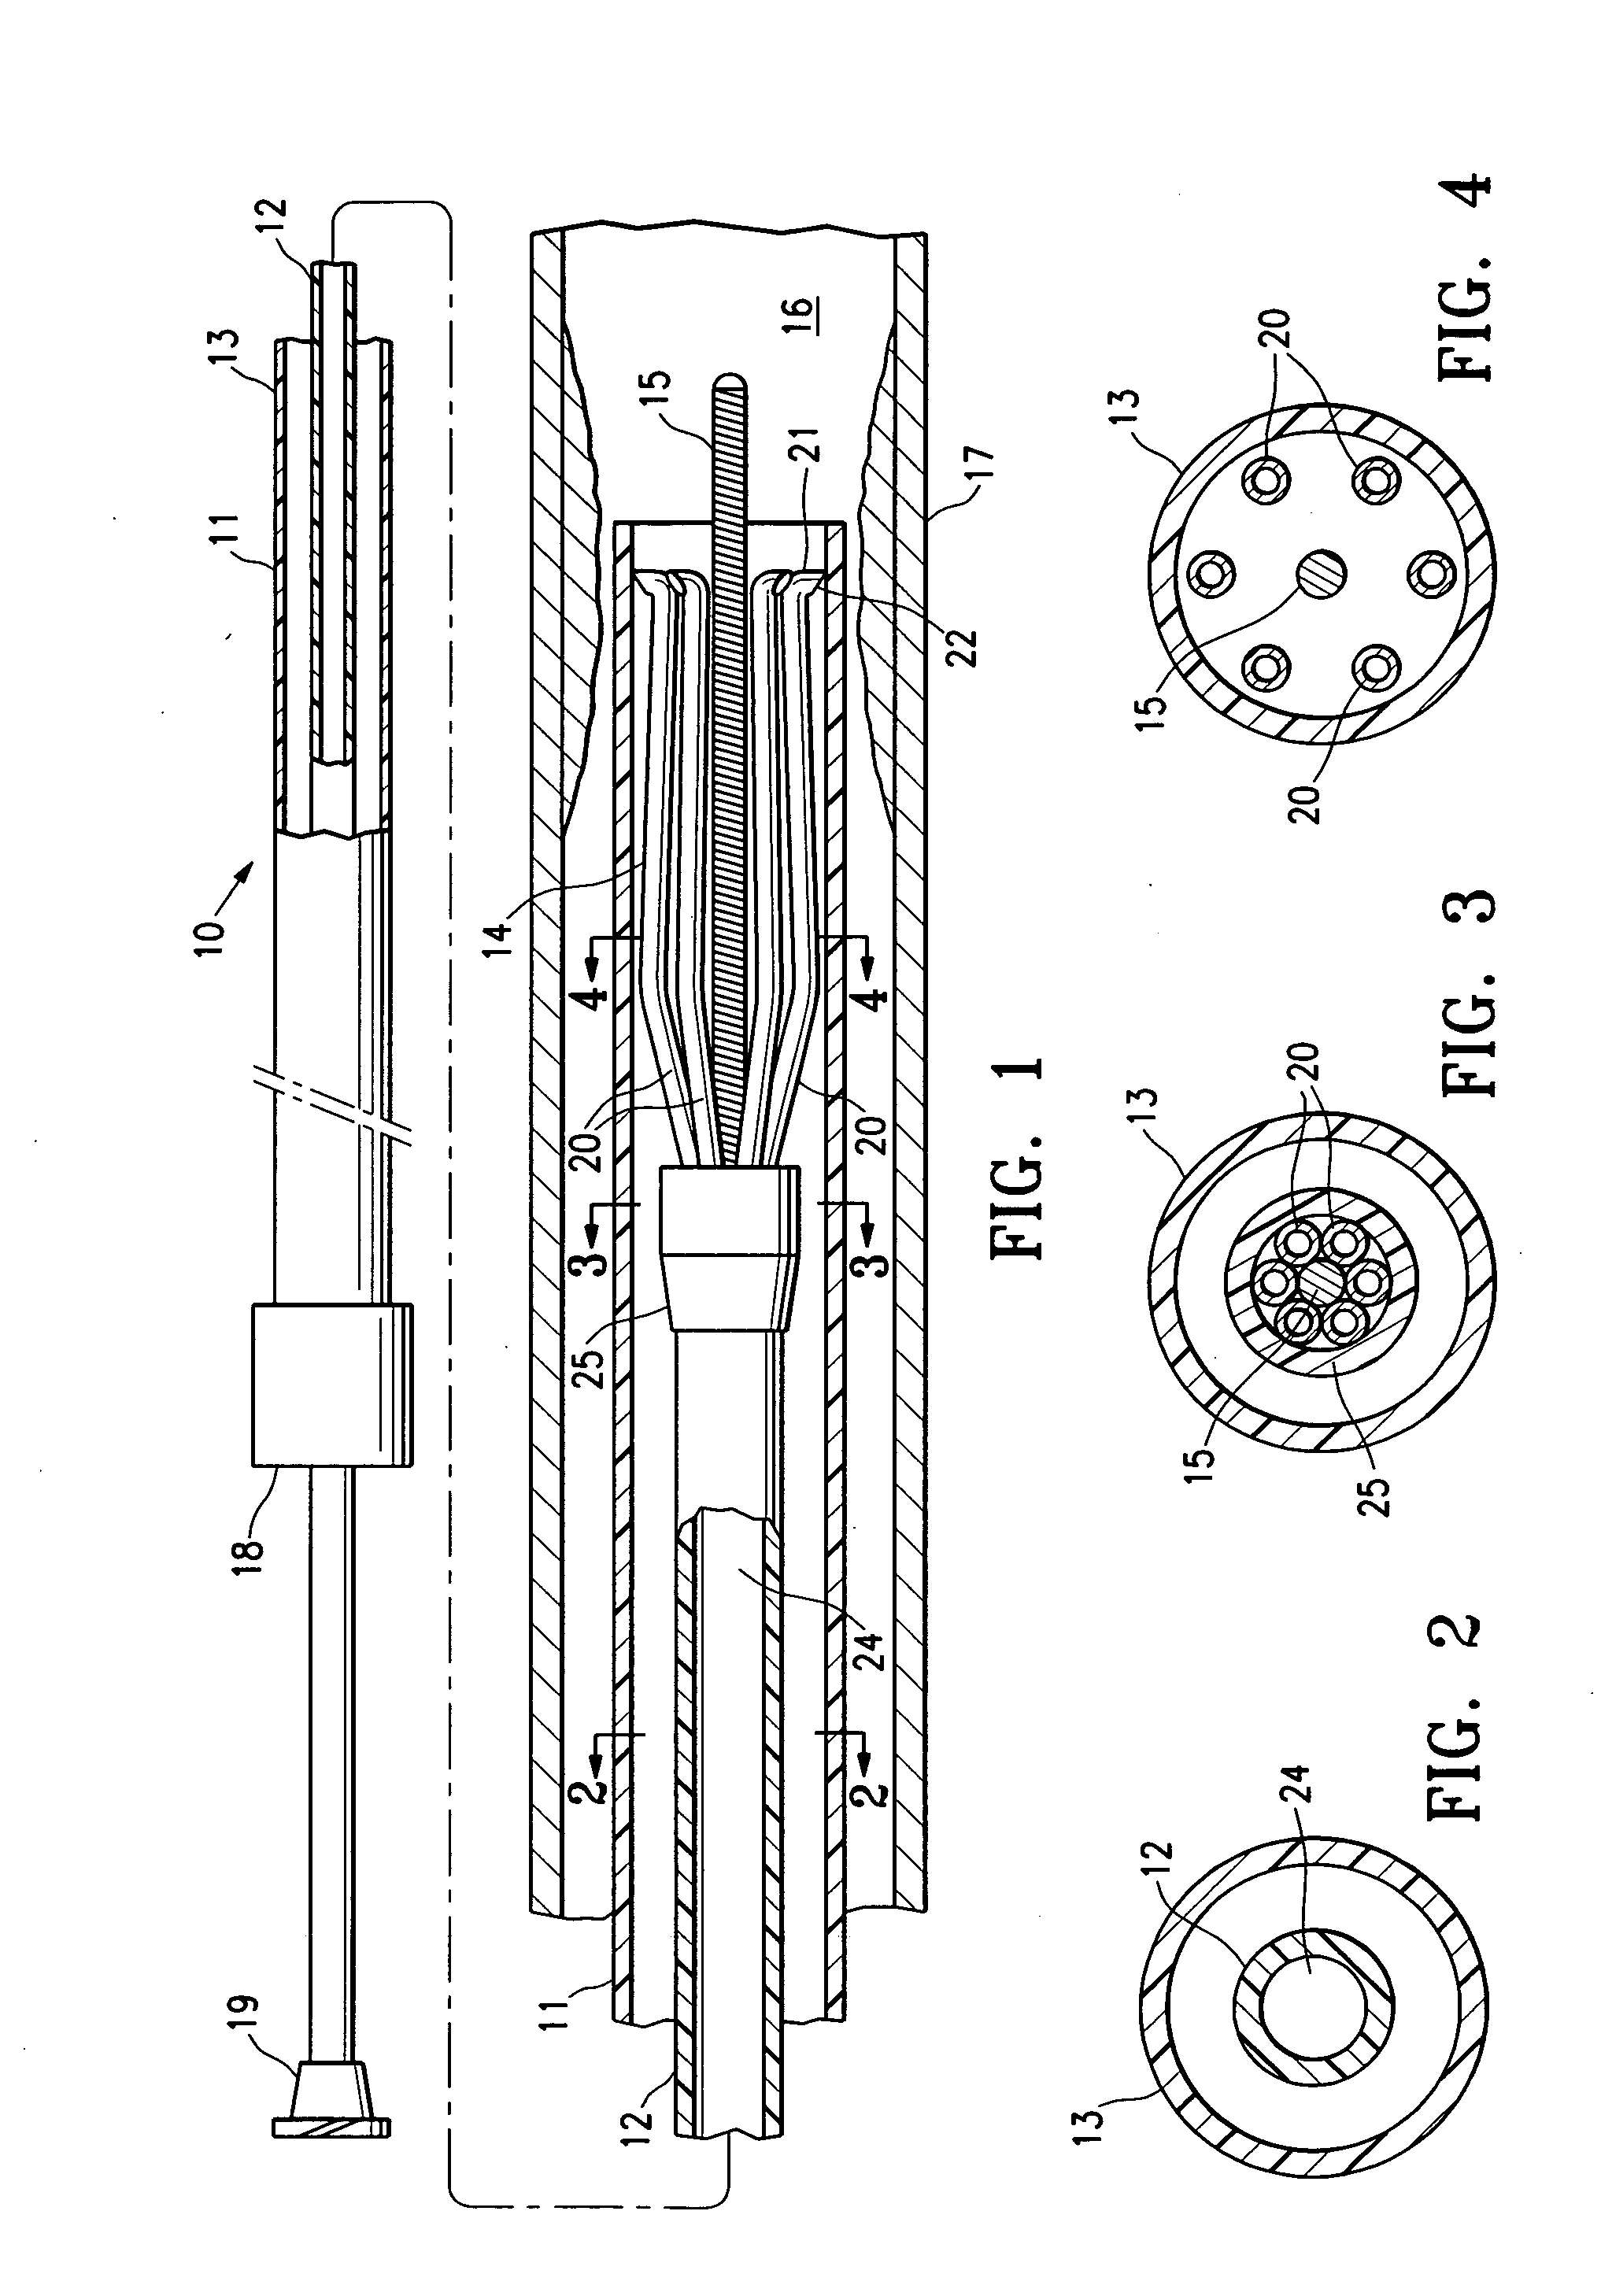 Devices and methods for intravascular drug delivery